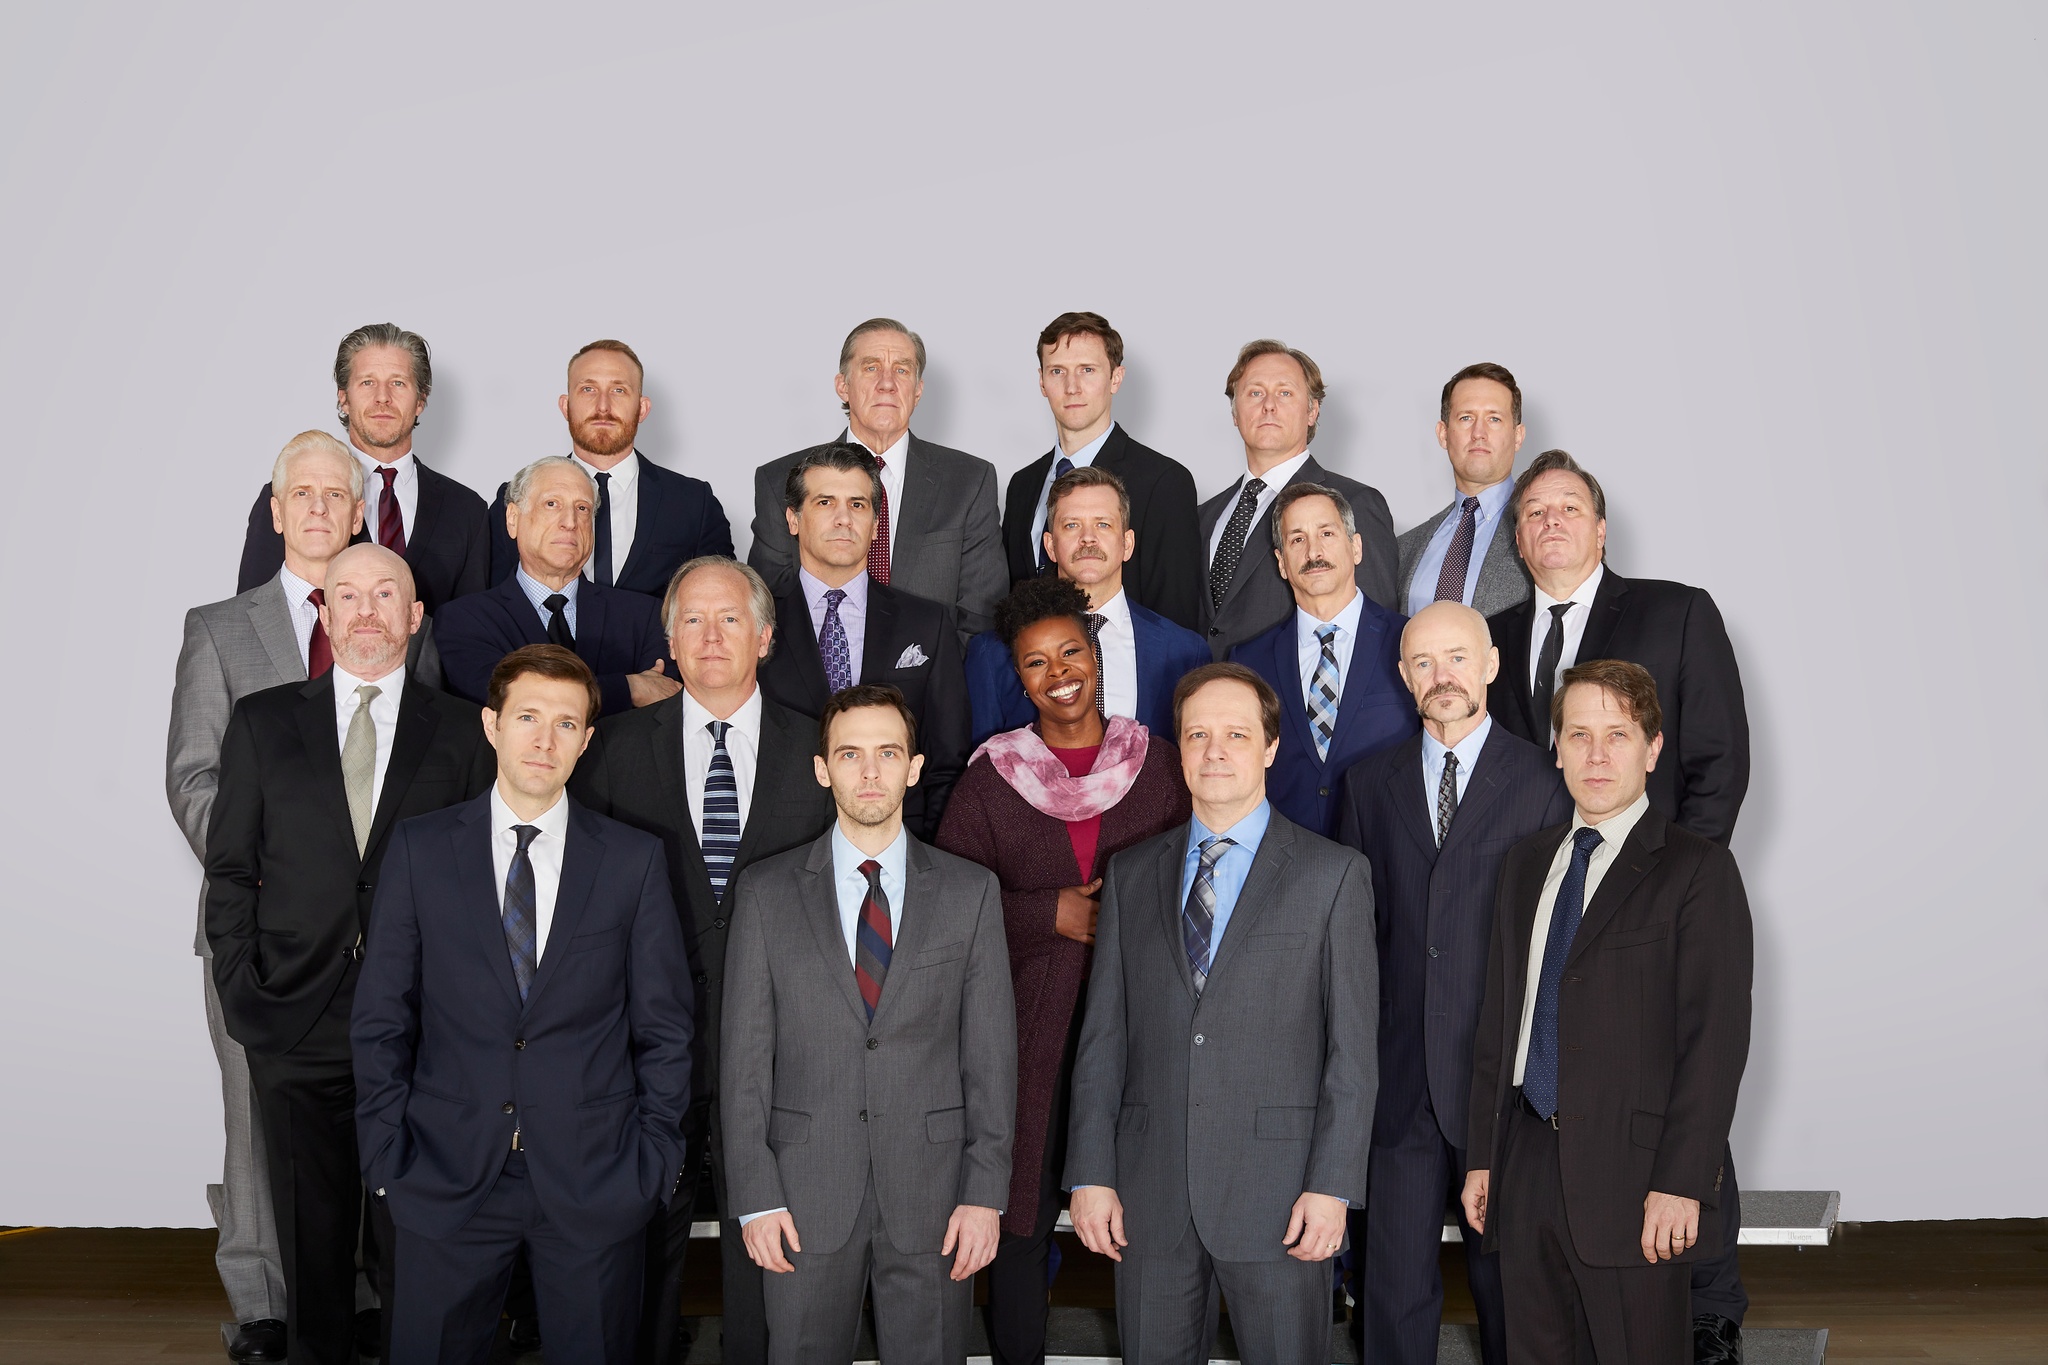 A cast photo including 19 white men actors with a black woman actor arranged on risers as if in a school class photo